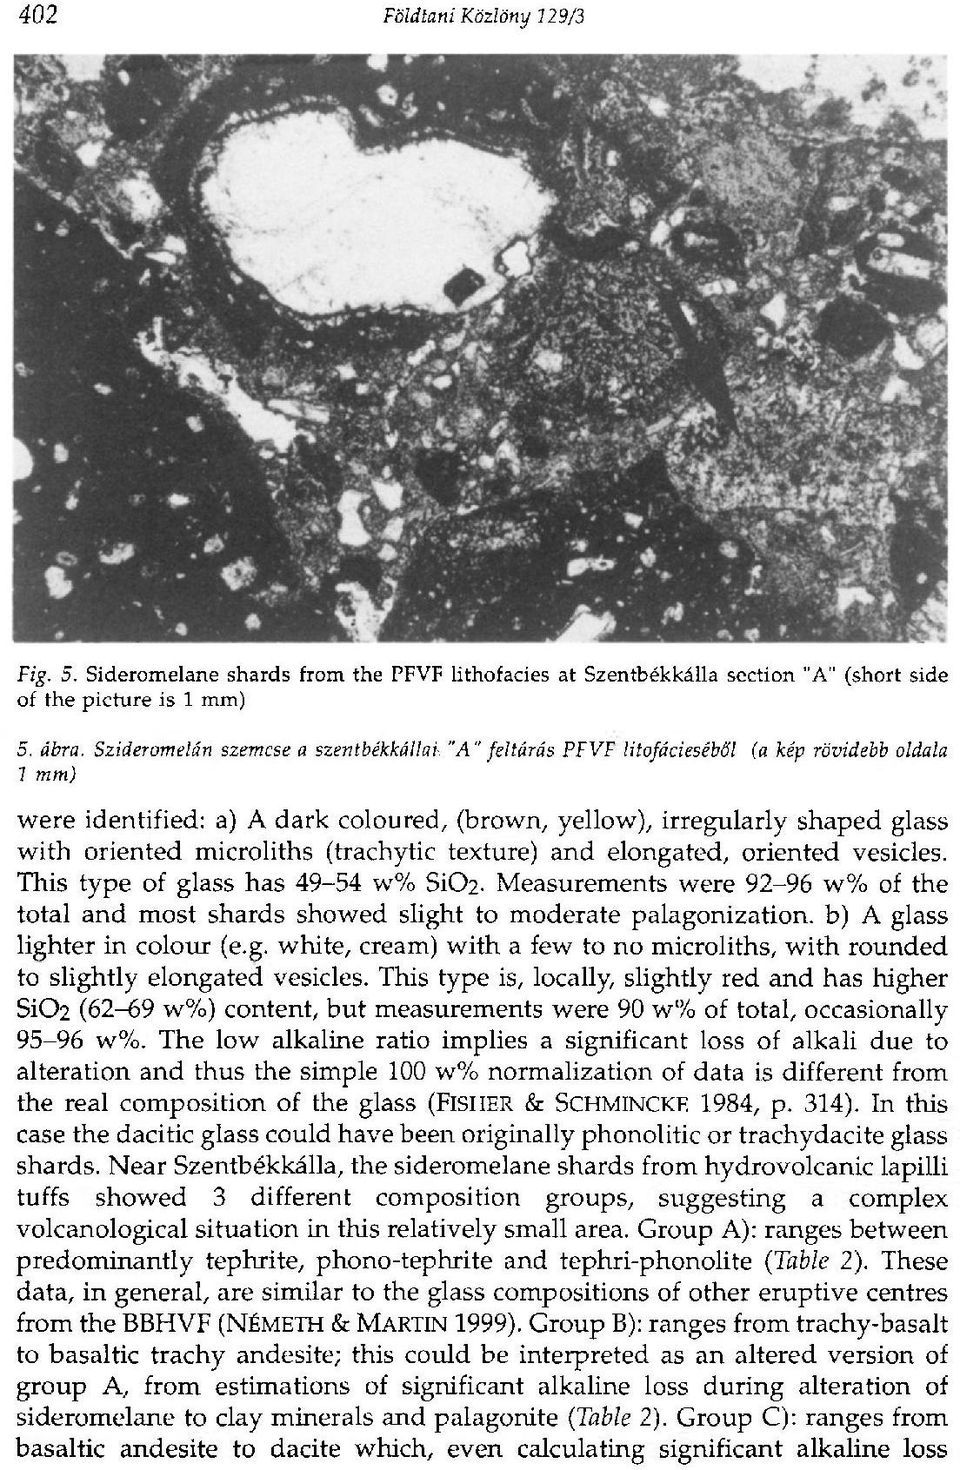 elongated, oriented vesicles. This type of glass has 49-54 w% SÍO2. Measurements were 92-96 w% of the total and most shards showed slight to moderate palagonization. b) A glass lighter in colour (e.g. white, cream) with a few to no microliths, with rounded to slightly elongated vesicles.